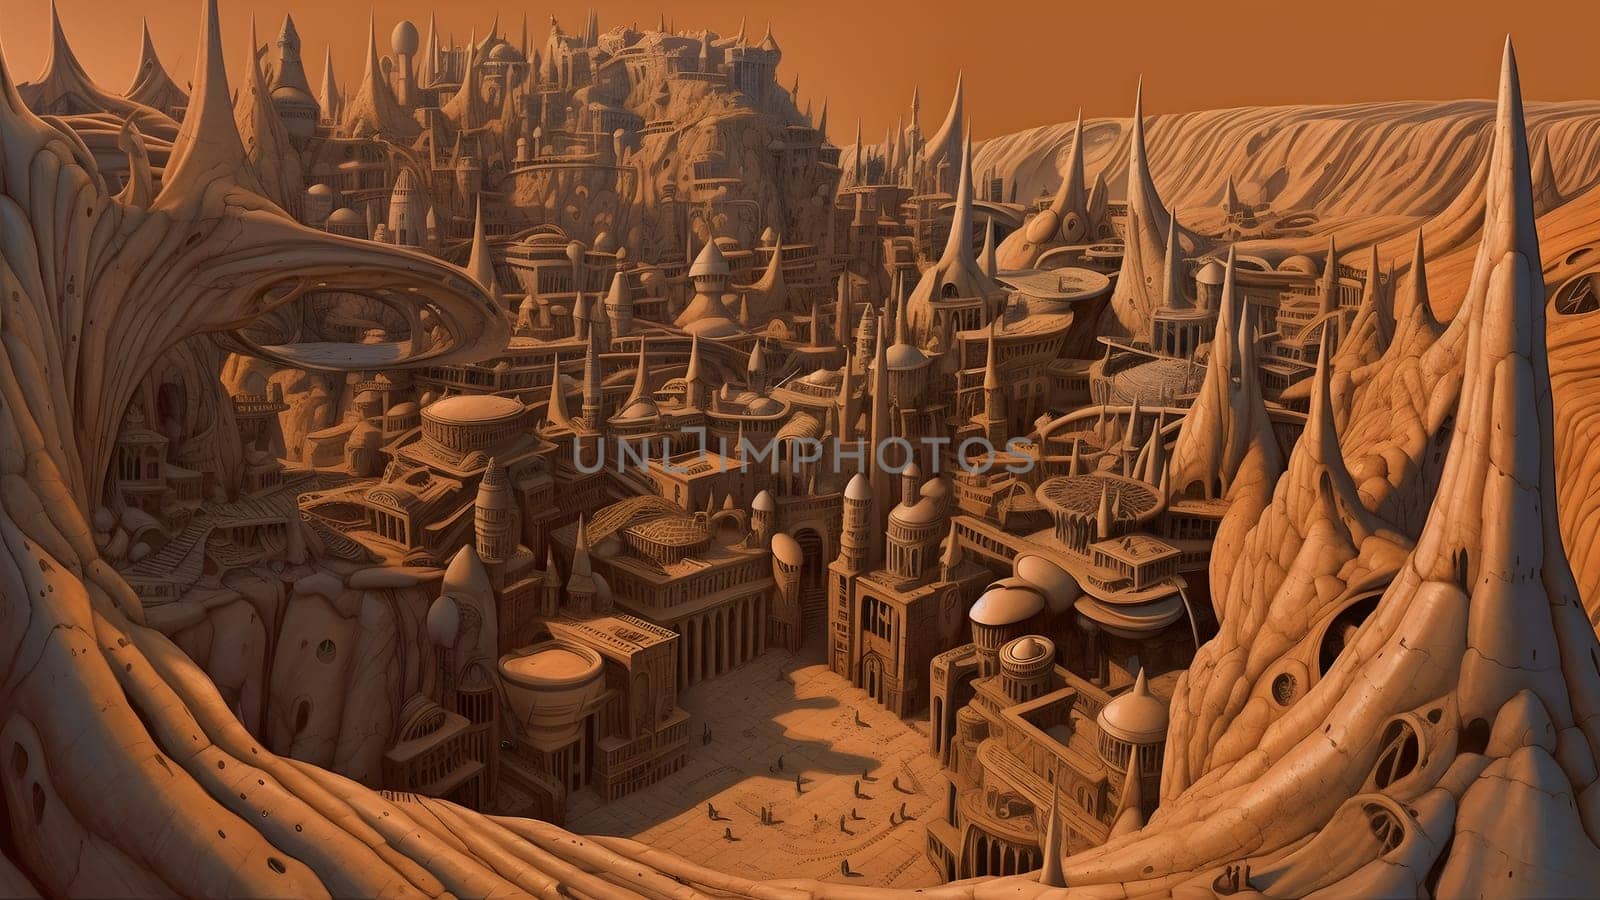 Fantastic alien city made of sand, neural network generated image by z1b